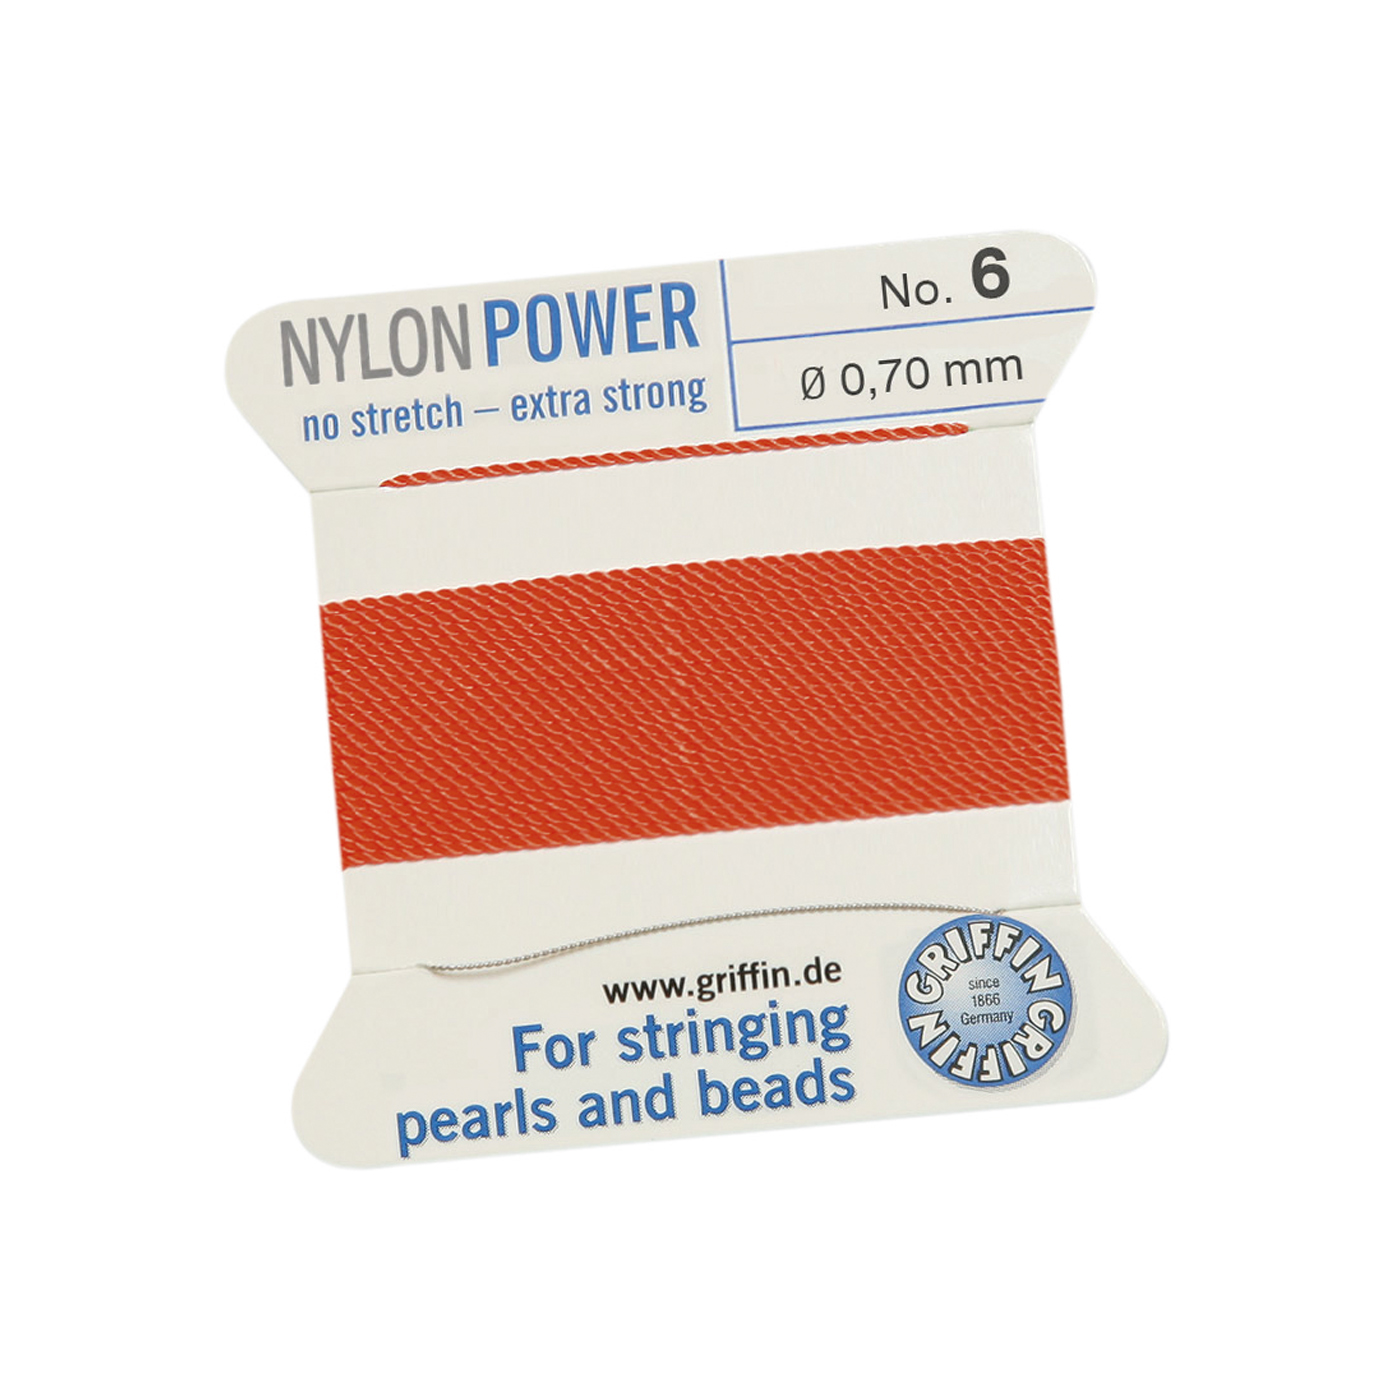 Bead Cord NylonPower, Coral Red, No. 6 - 2 m